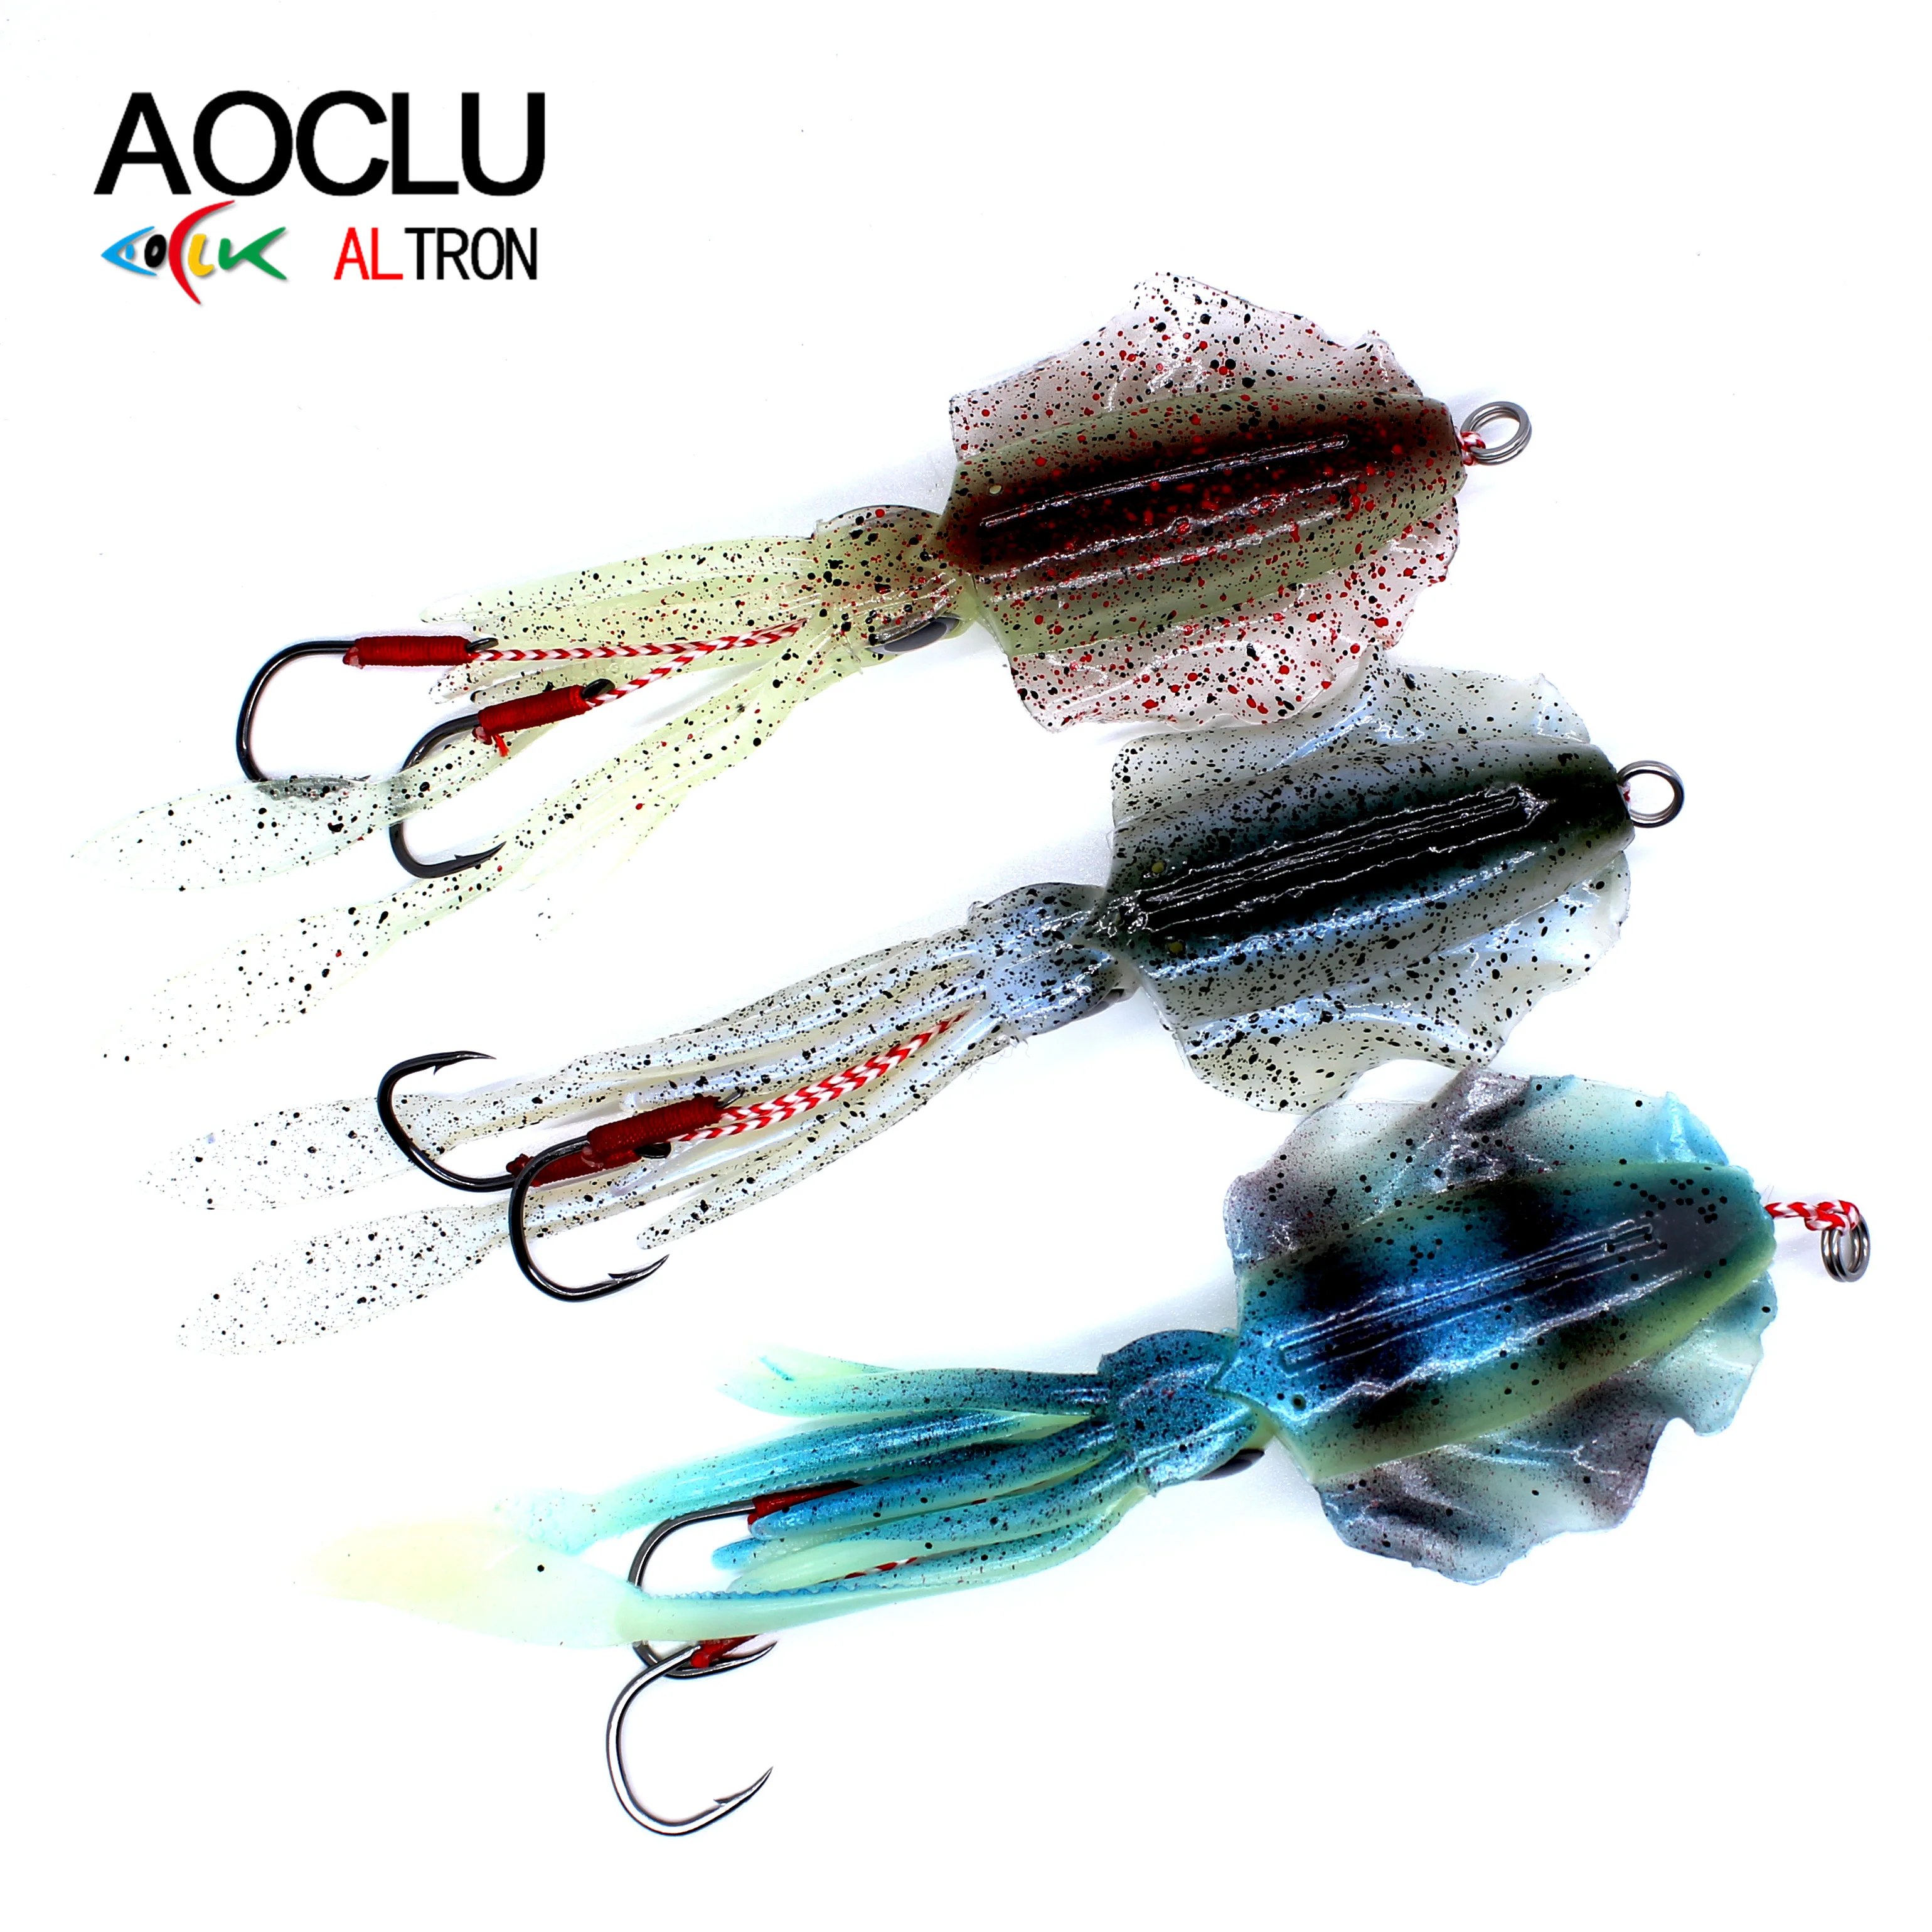 

AOCLU New 60g 150mm Silicon Squid Octopus Jig Bait Lure Glowing Under UV With 4/0 Assist Hooks For Saltwater Trolling Fishing, 12 colors